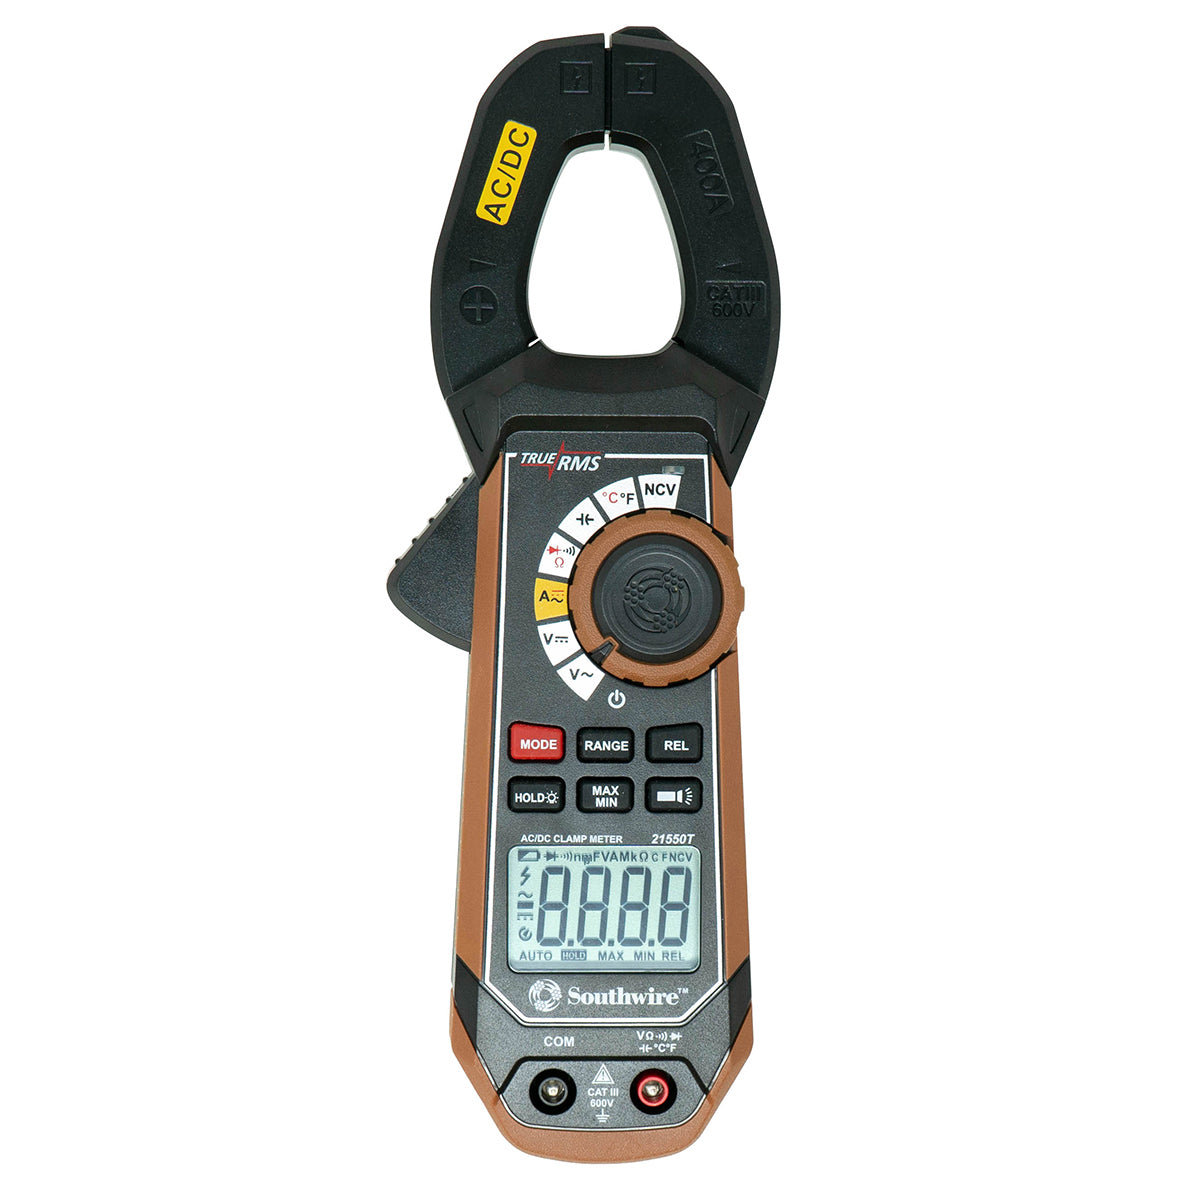 Southwire Clamp Meter 400A AC/DC